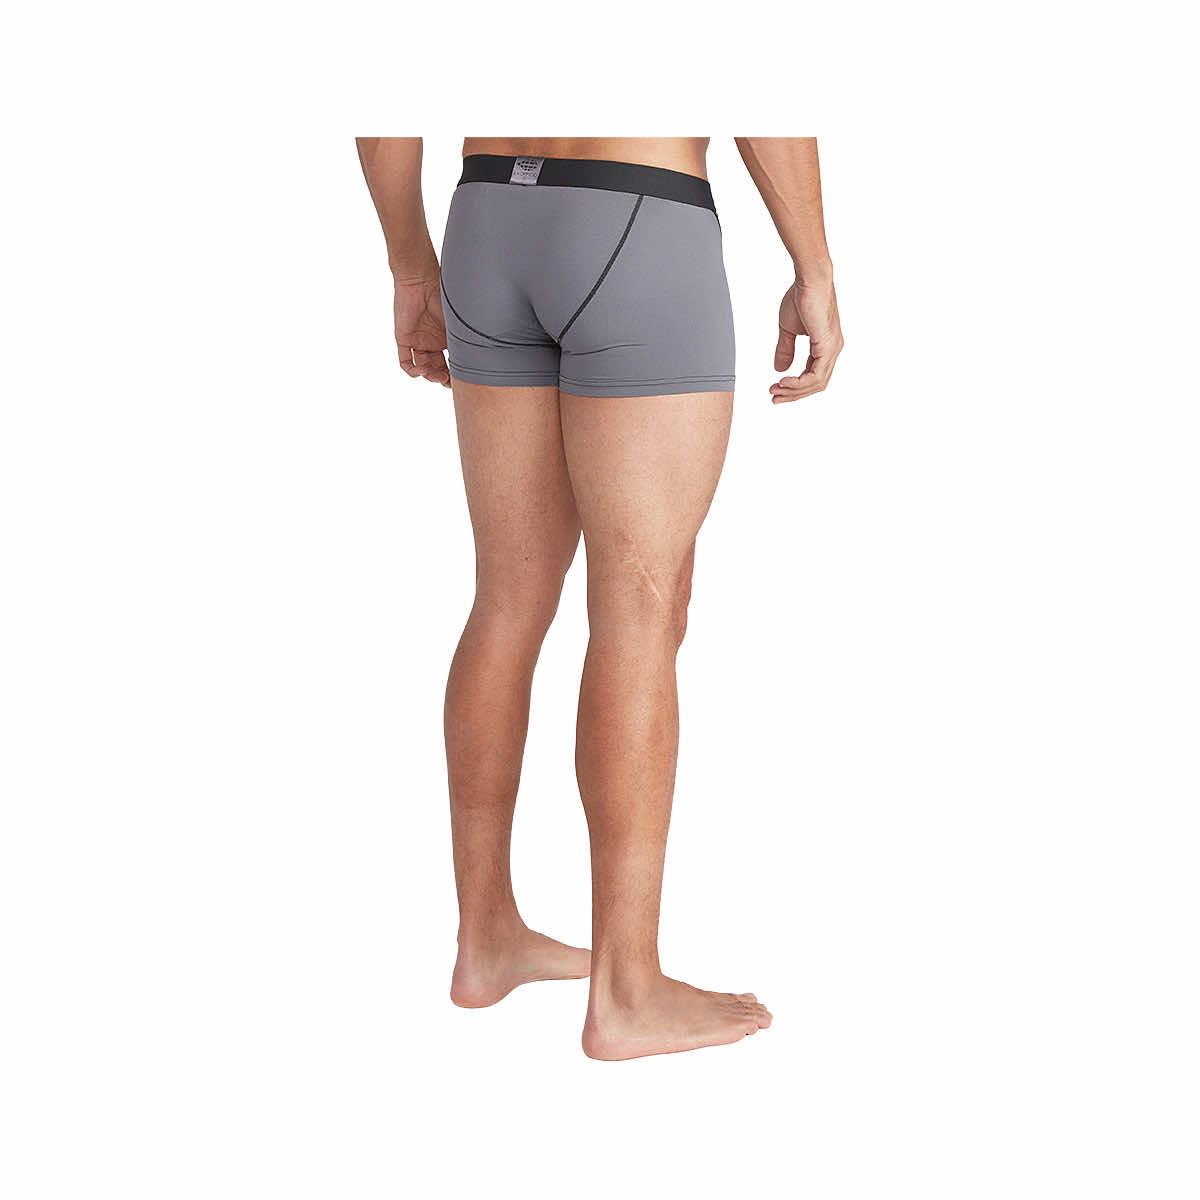 Give-N-Go Sport 2.0 6 Inch Boxer Brief